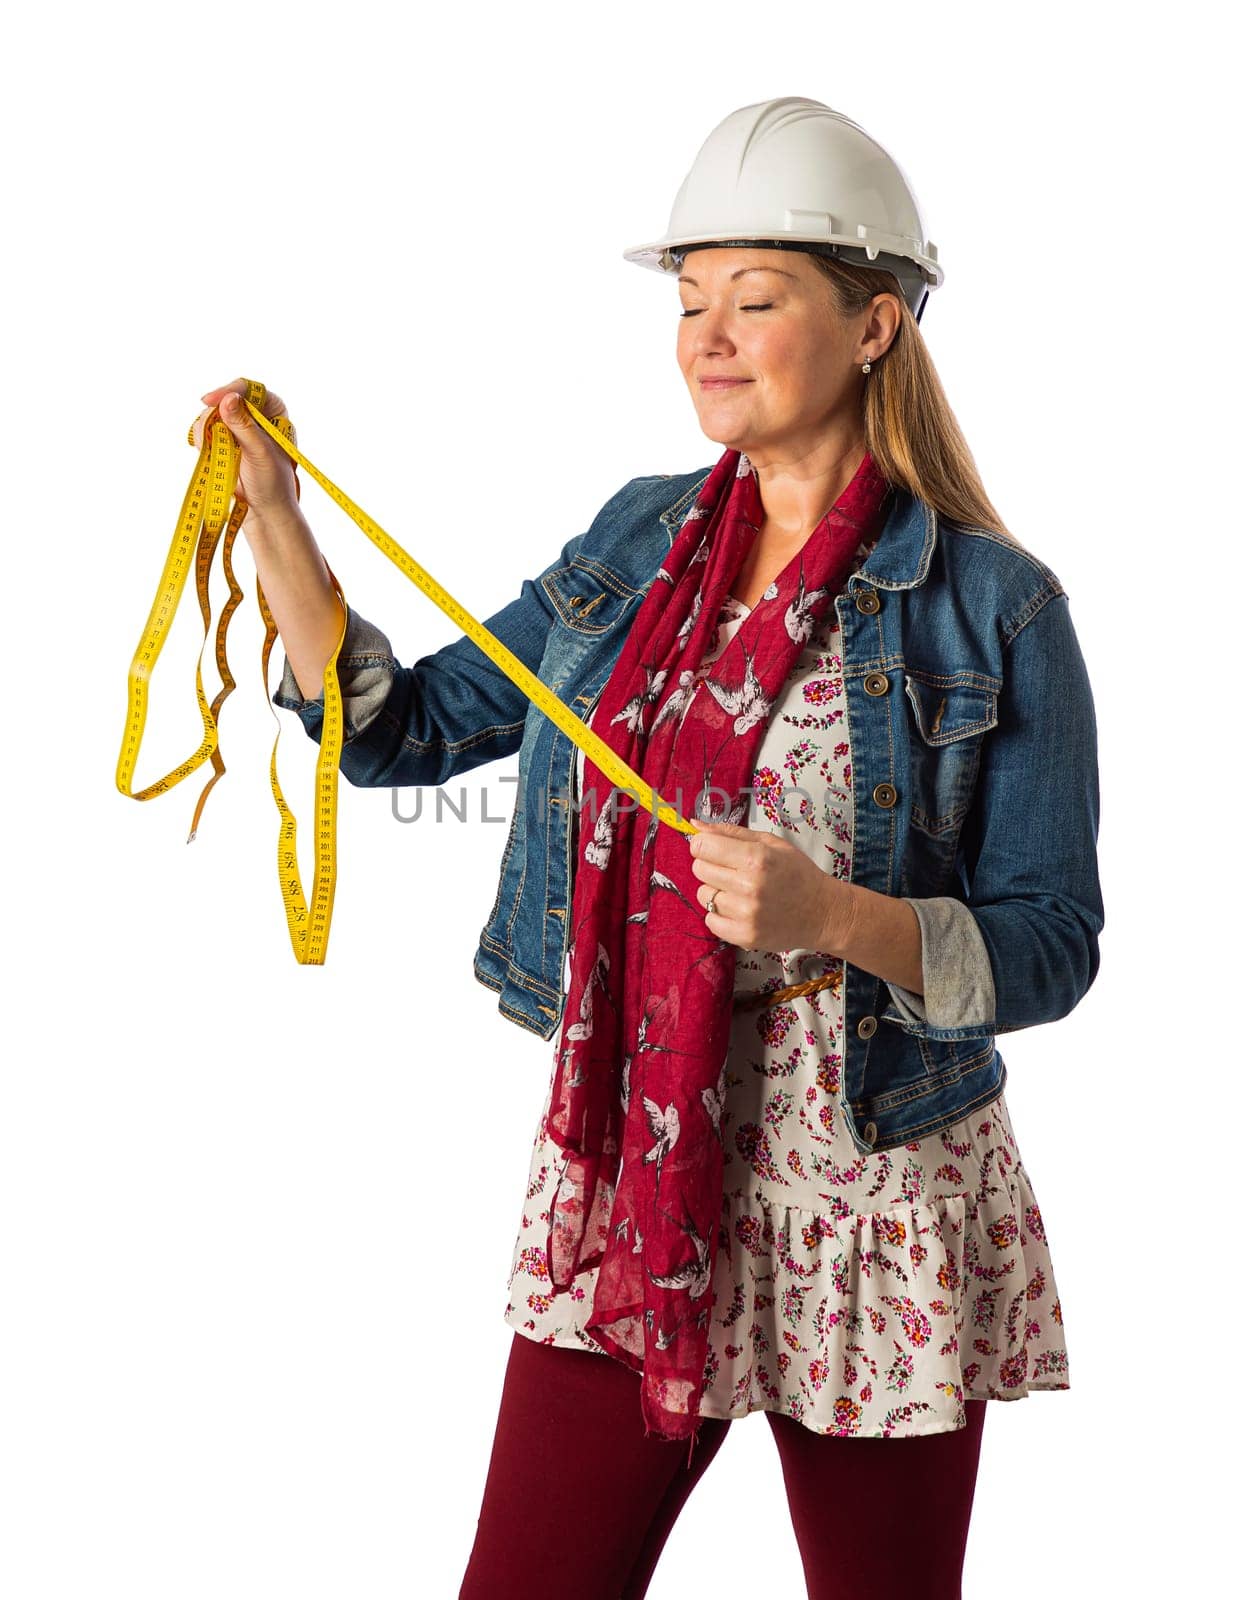 Forty year old woman, wearing bohemian style clothing and a hard har, holding a yellow mesuring tape, isolated on a white background